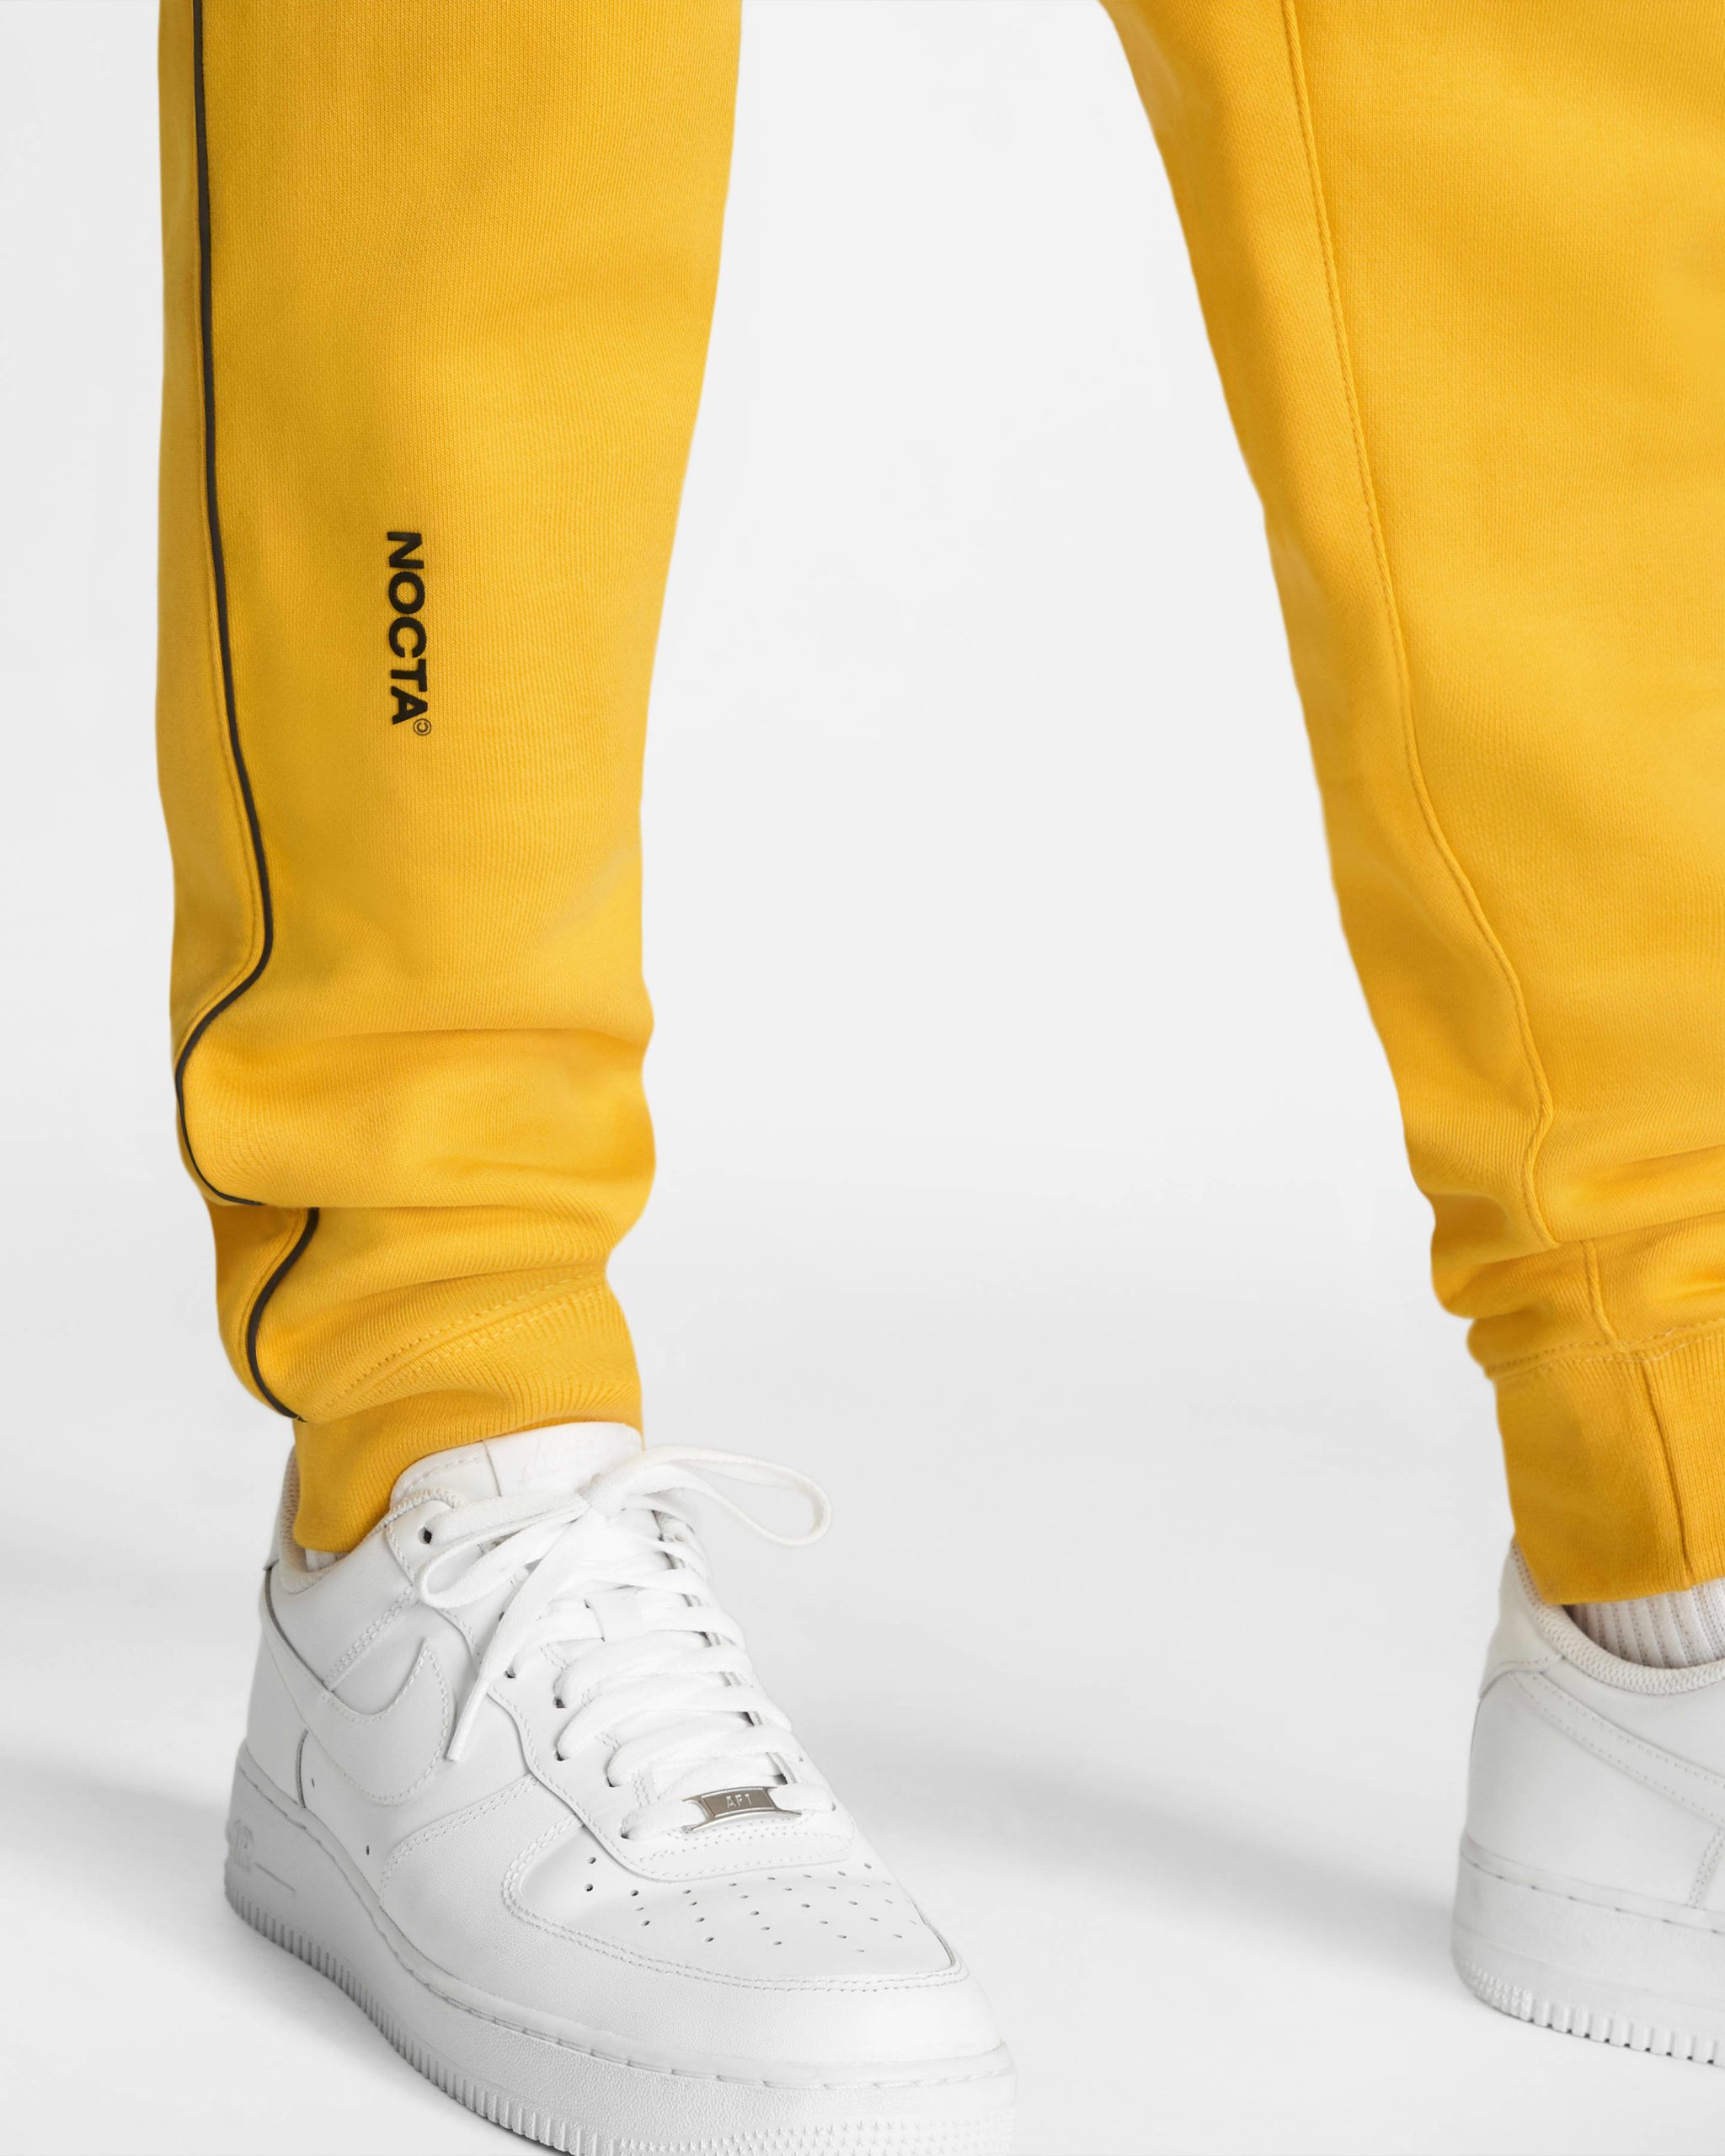 Official Look at Drake and Nike's First NOCTA Apparel Collection